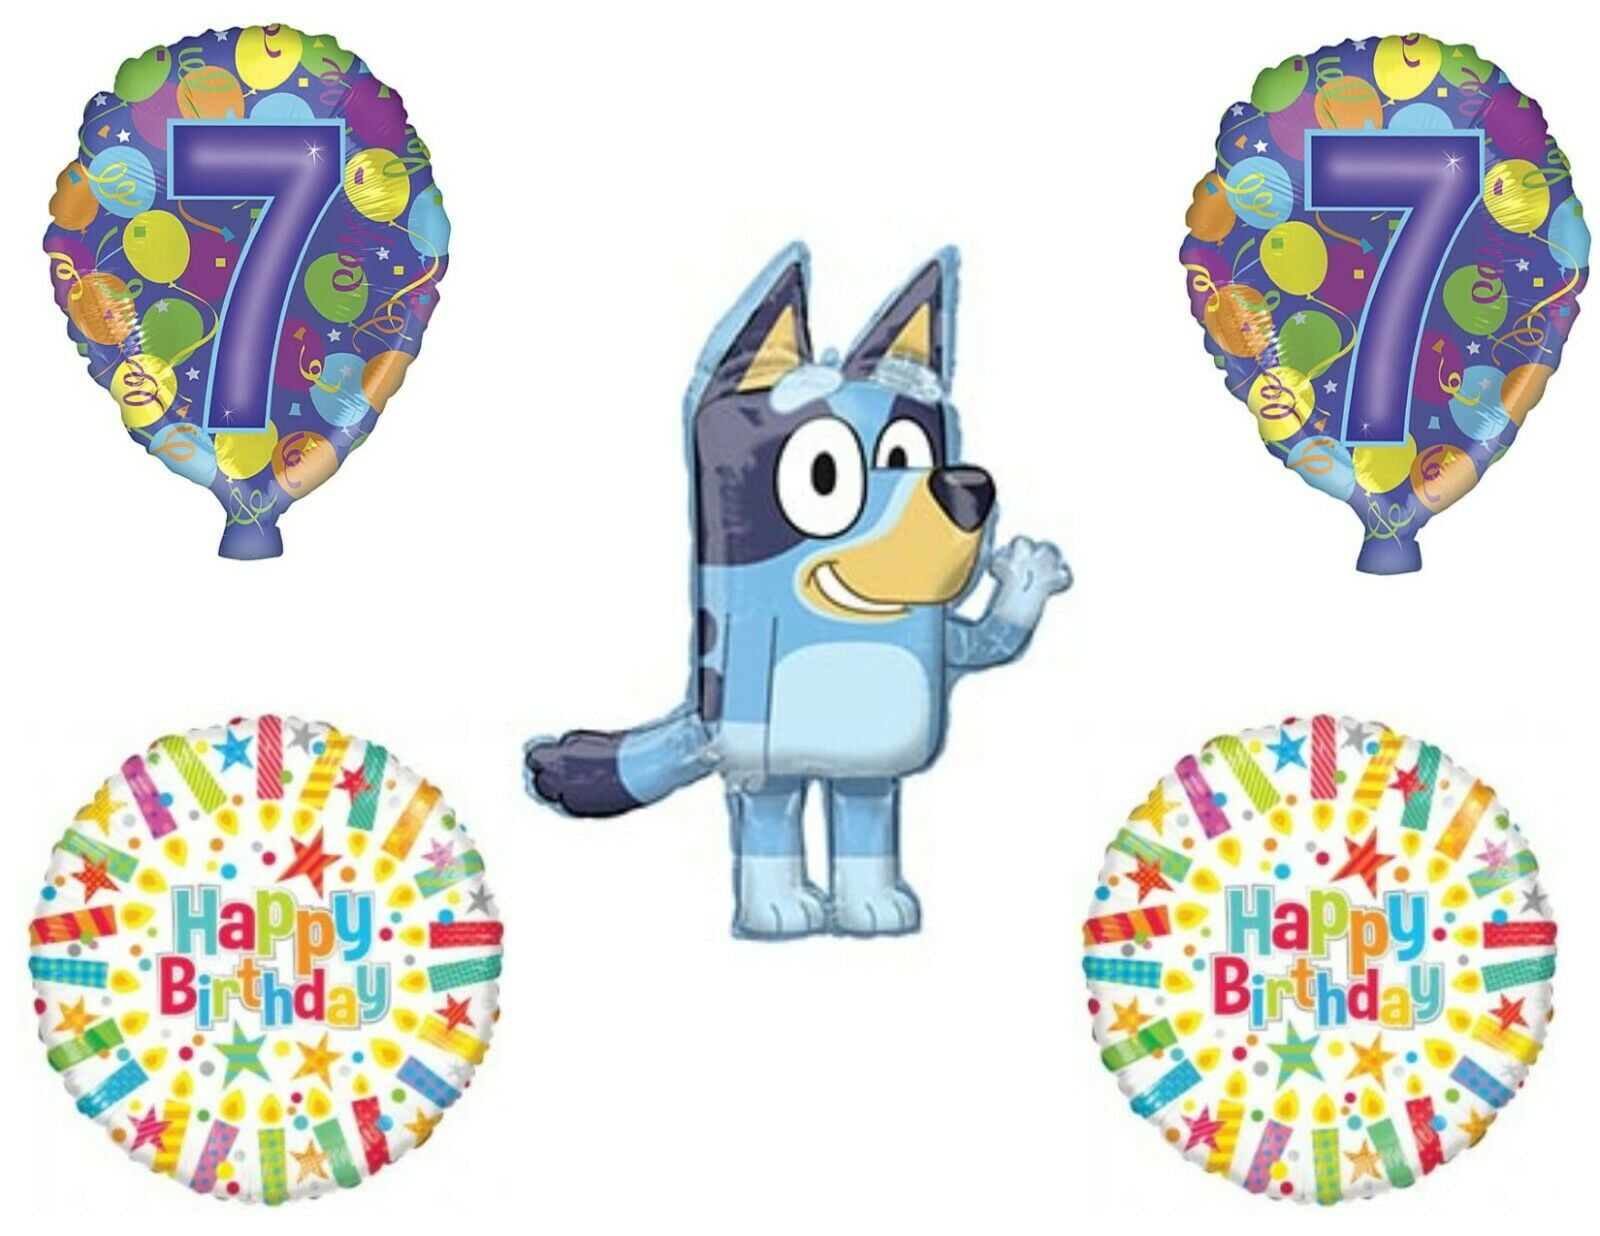 Bluey birthday party supplies ，Bluey Themed Birthday Party Decorations Set  includes happy birthday banner， cake topper ，birthday balloons for kids  birthday decorations